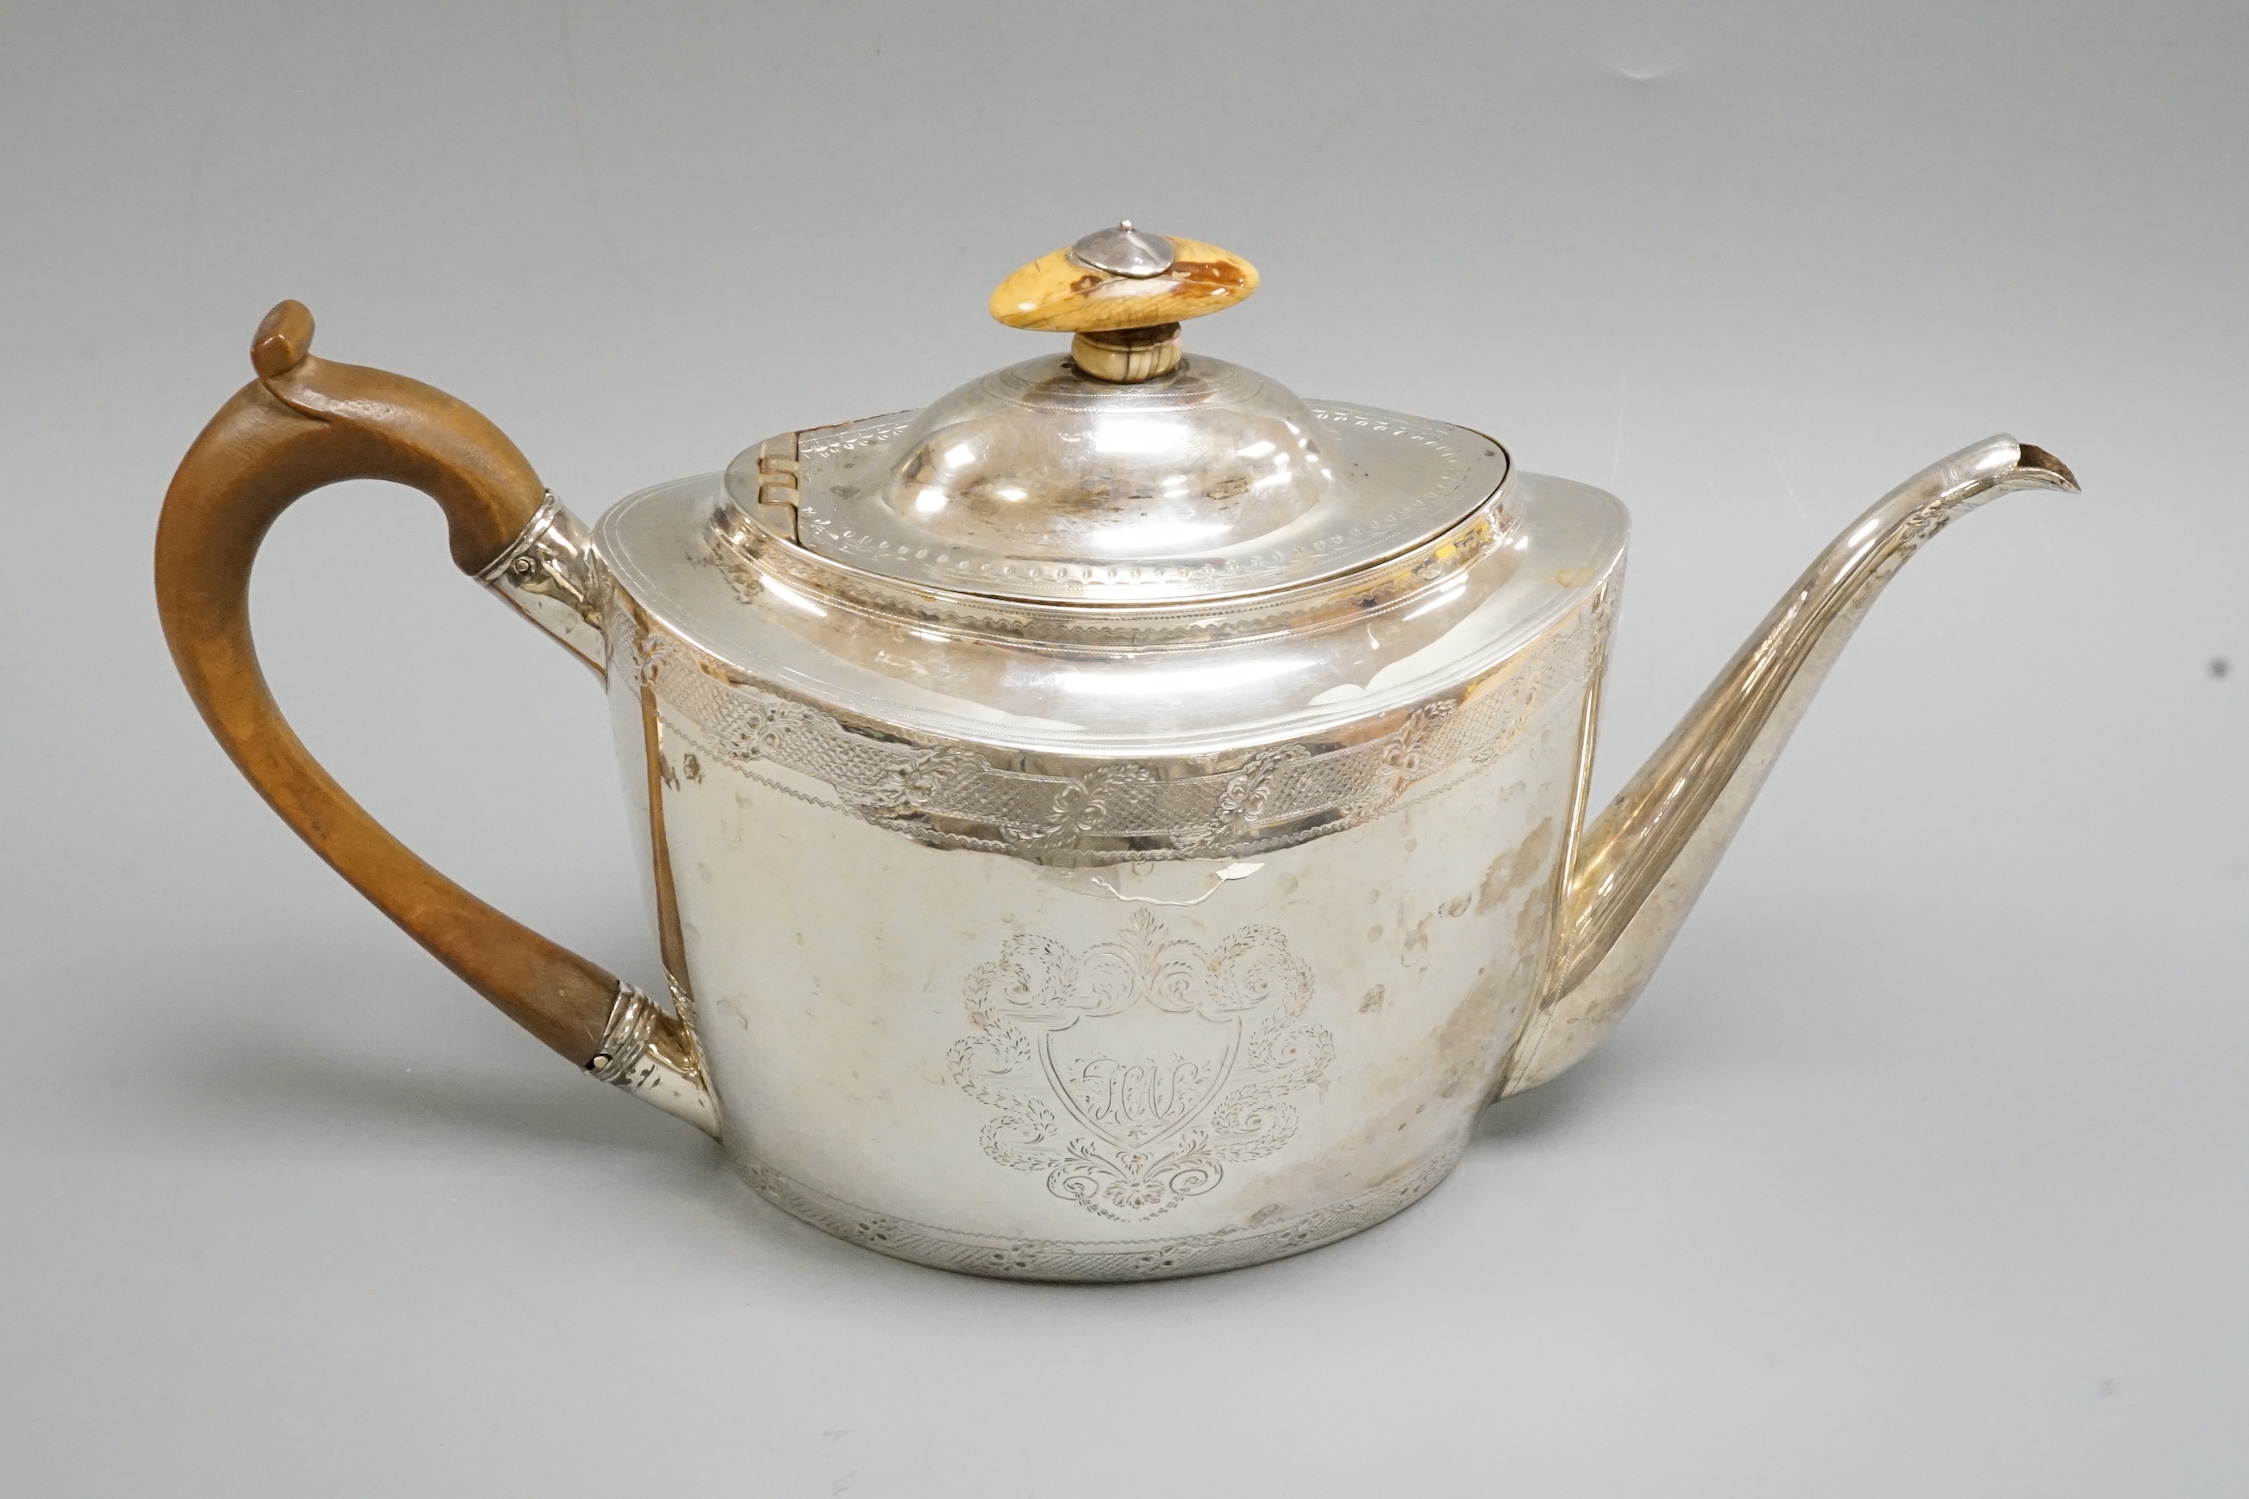 A George III chased oval silver teapot, by Thomas Wallis, London, 1798, gross weight 15.4oz.